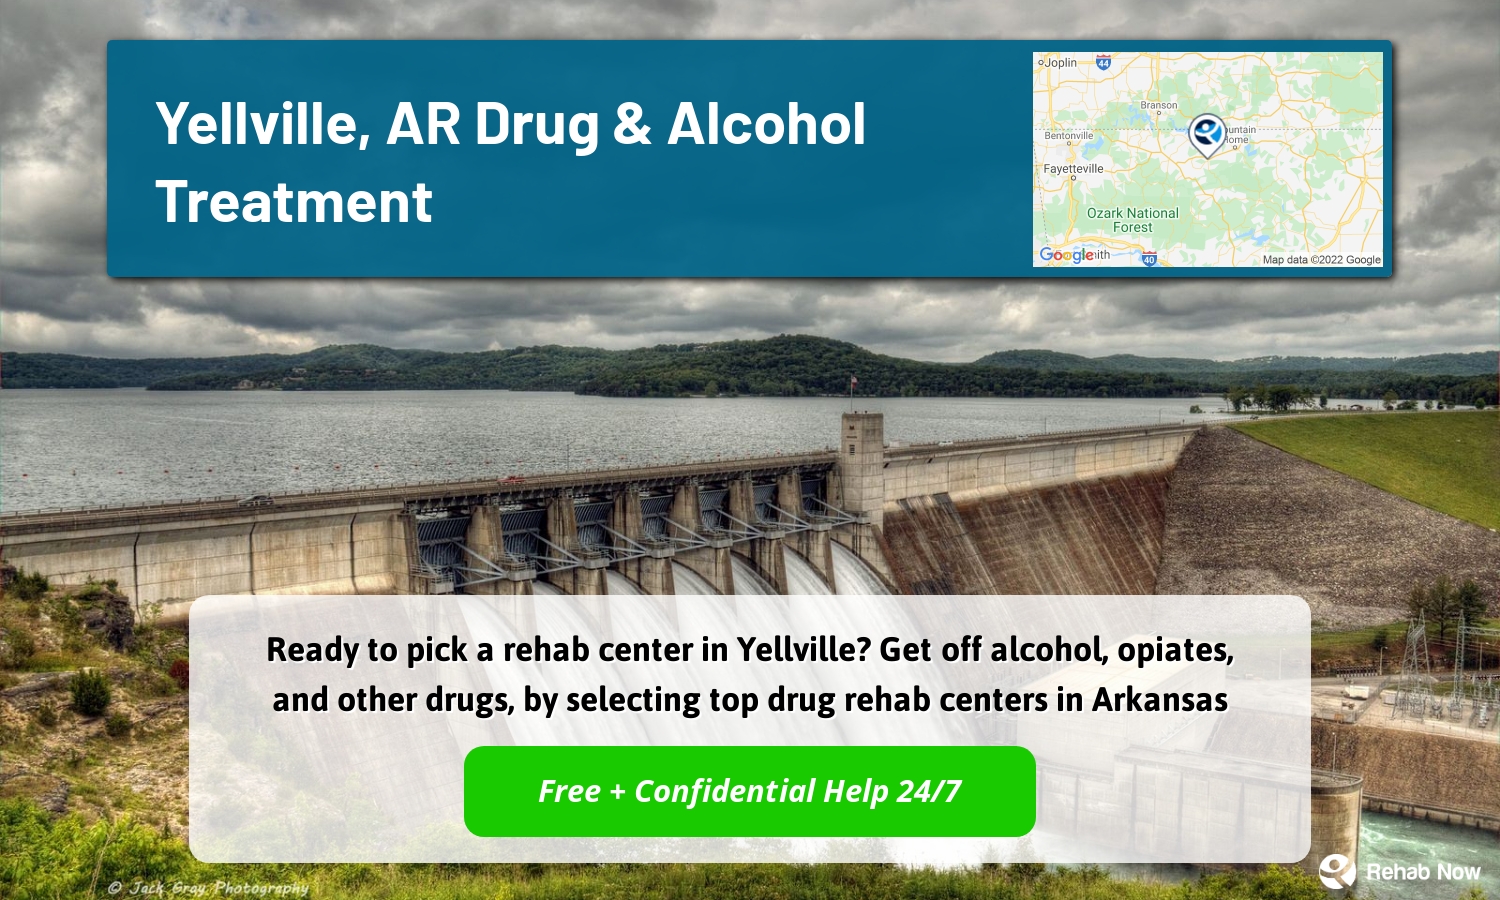 Ready to pick a rehab center in Yellville? Get off alcohol, opiates, and other drugs, by selecting top drug rehab centers in Arkansas